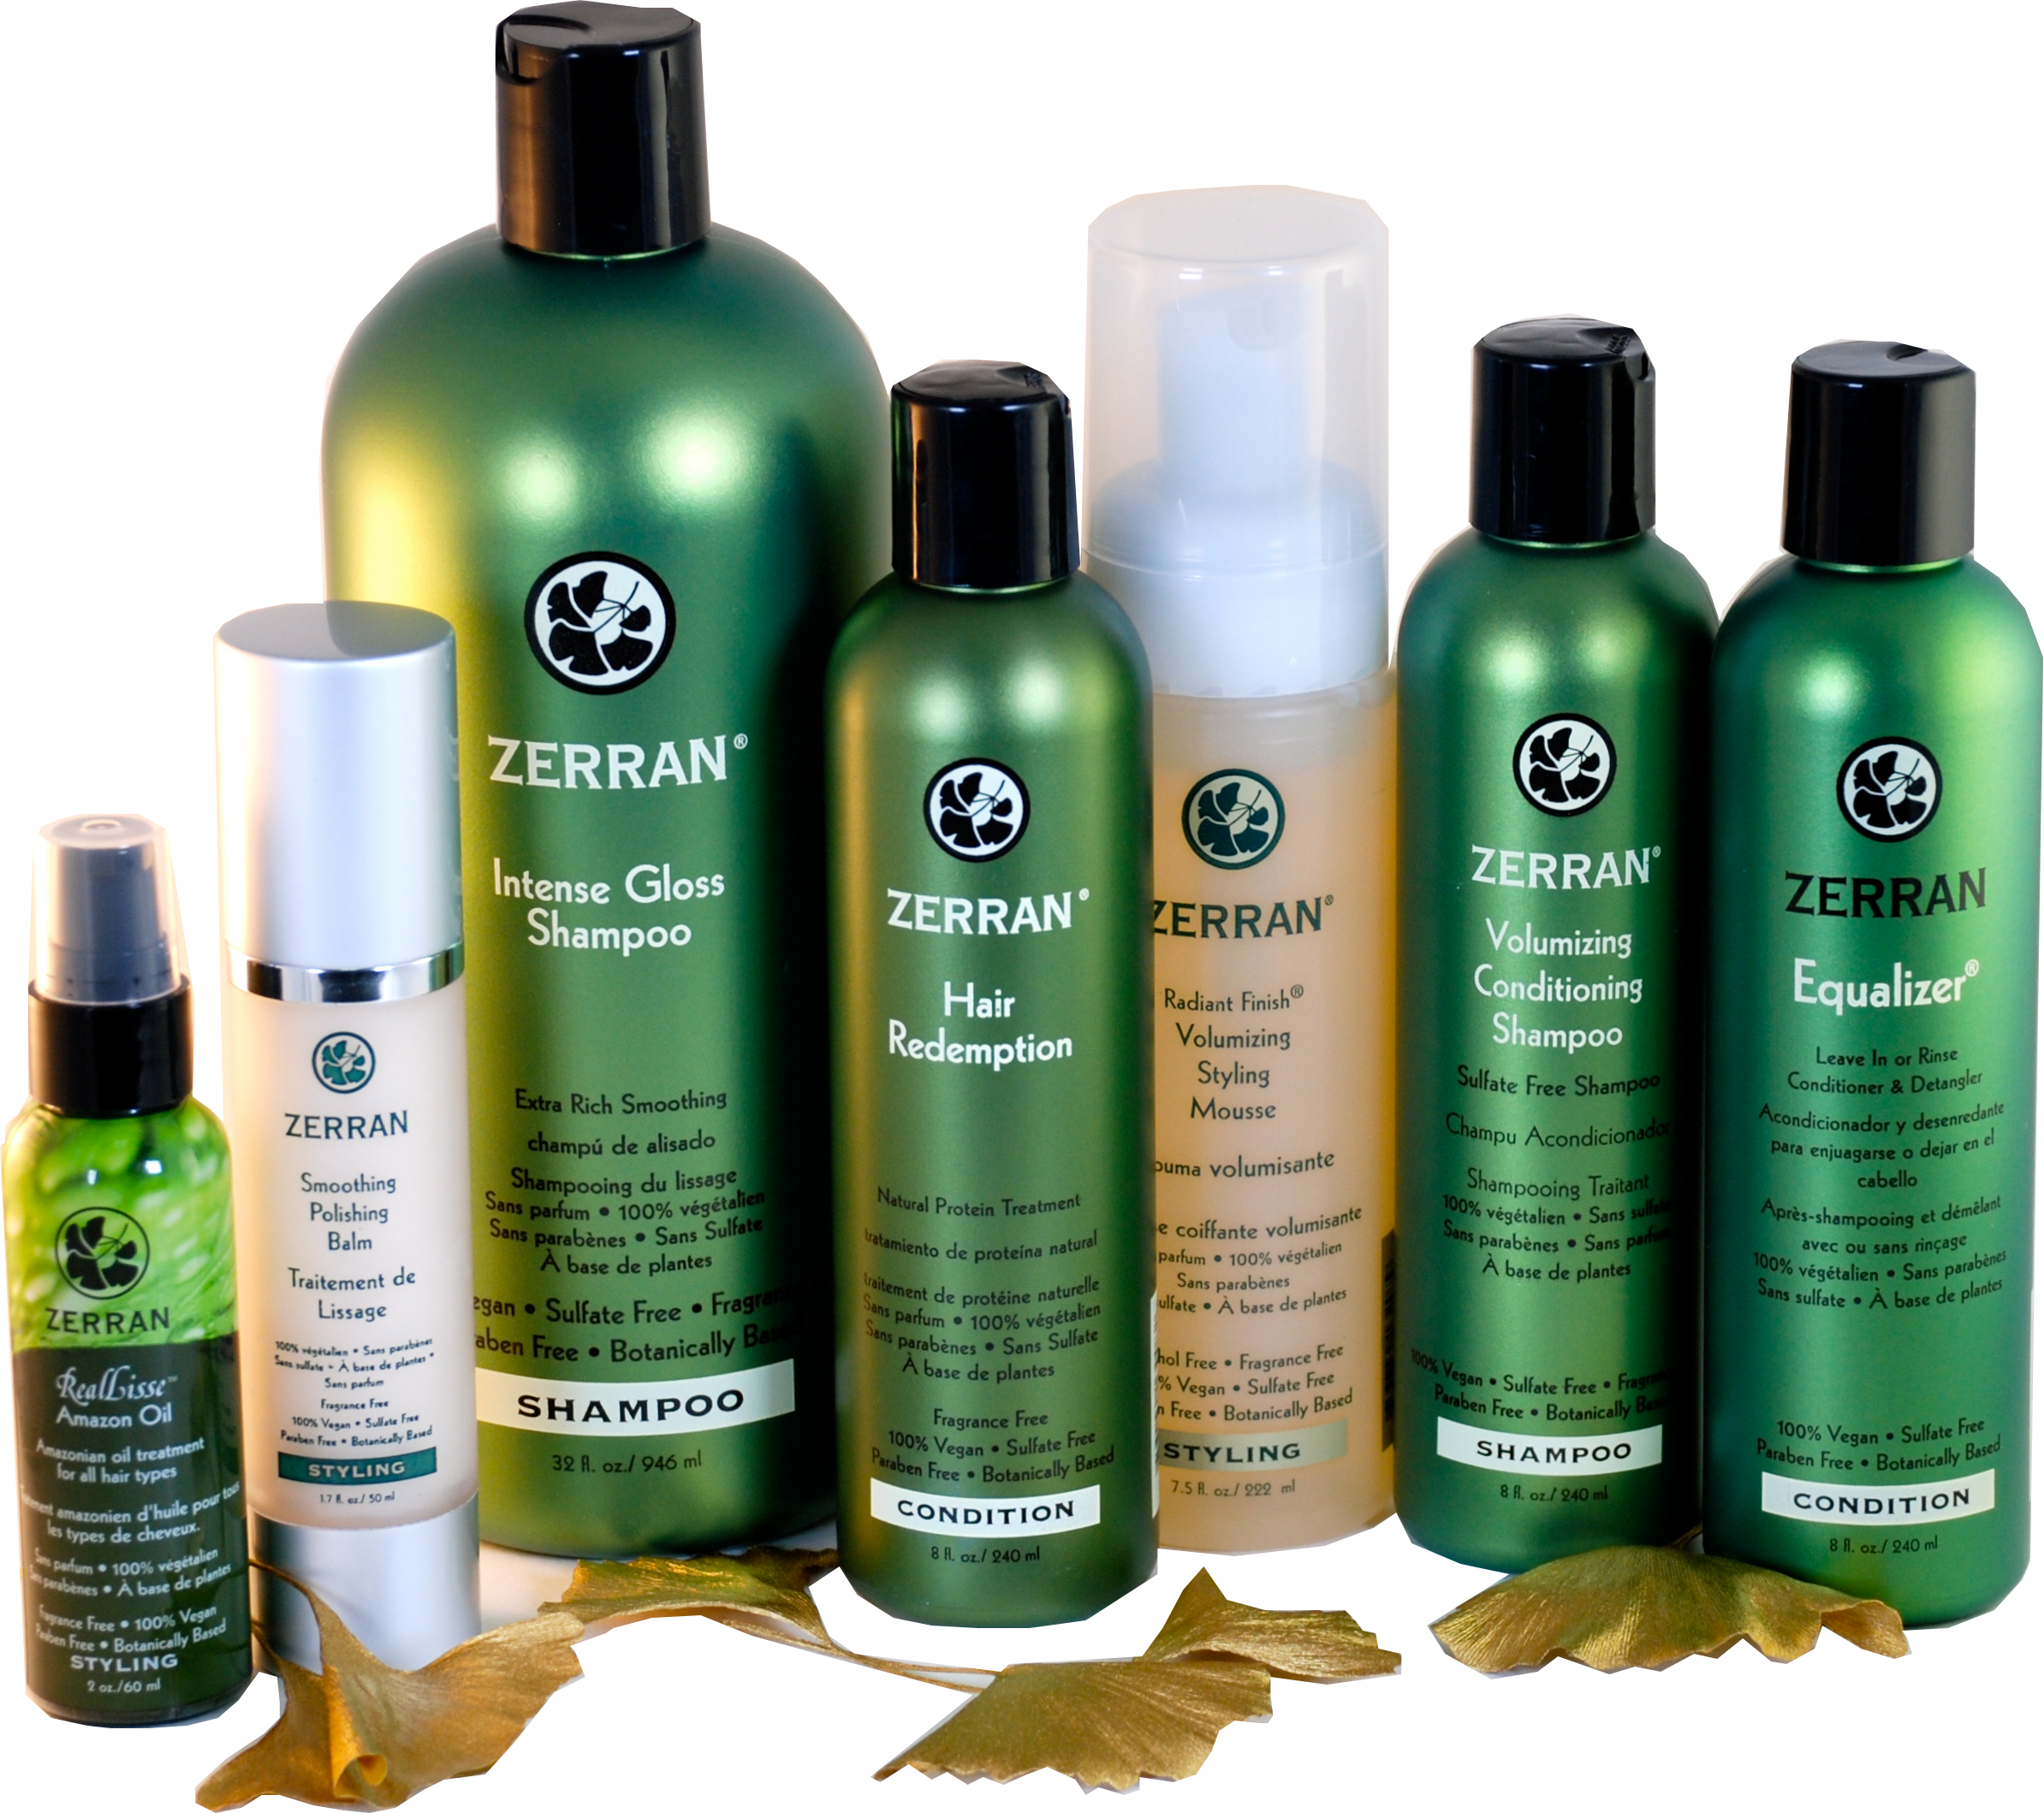 Zerran Hair Care products are now GMO-free for the concerned stylist and consumer